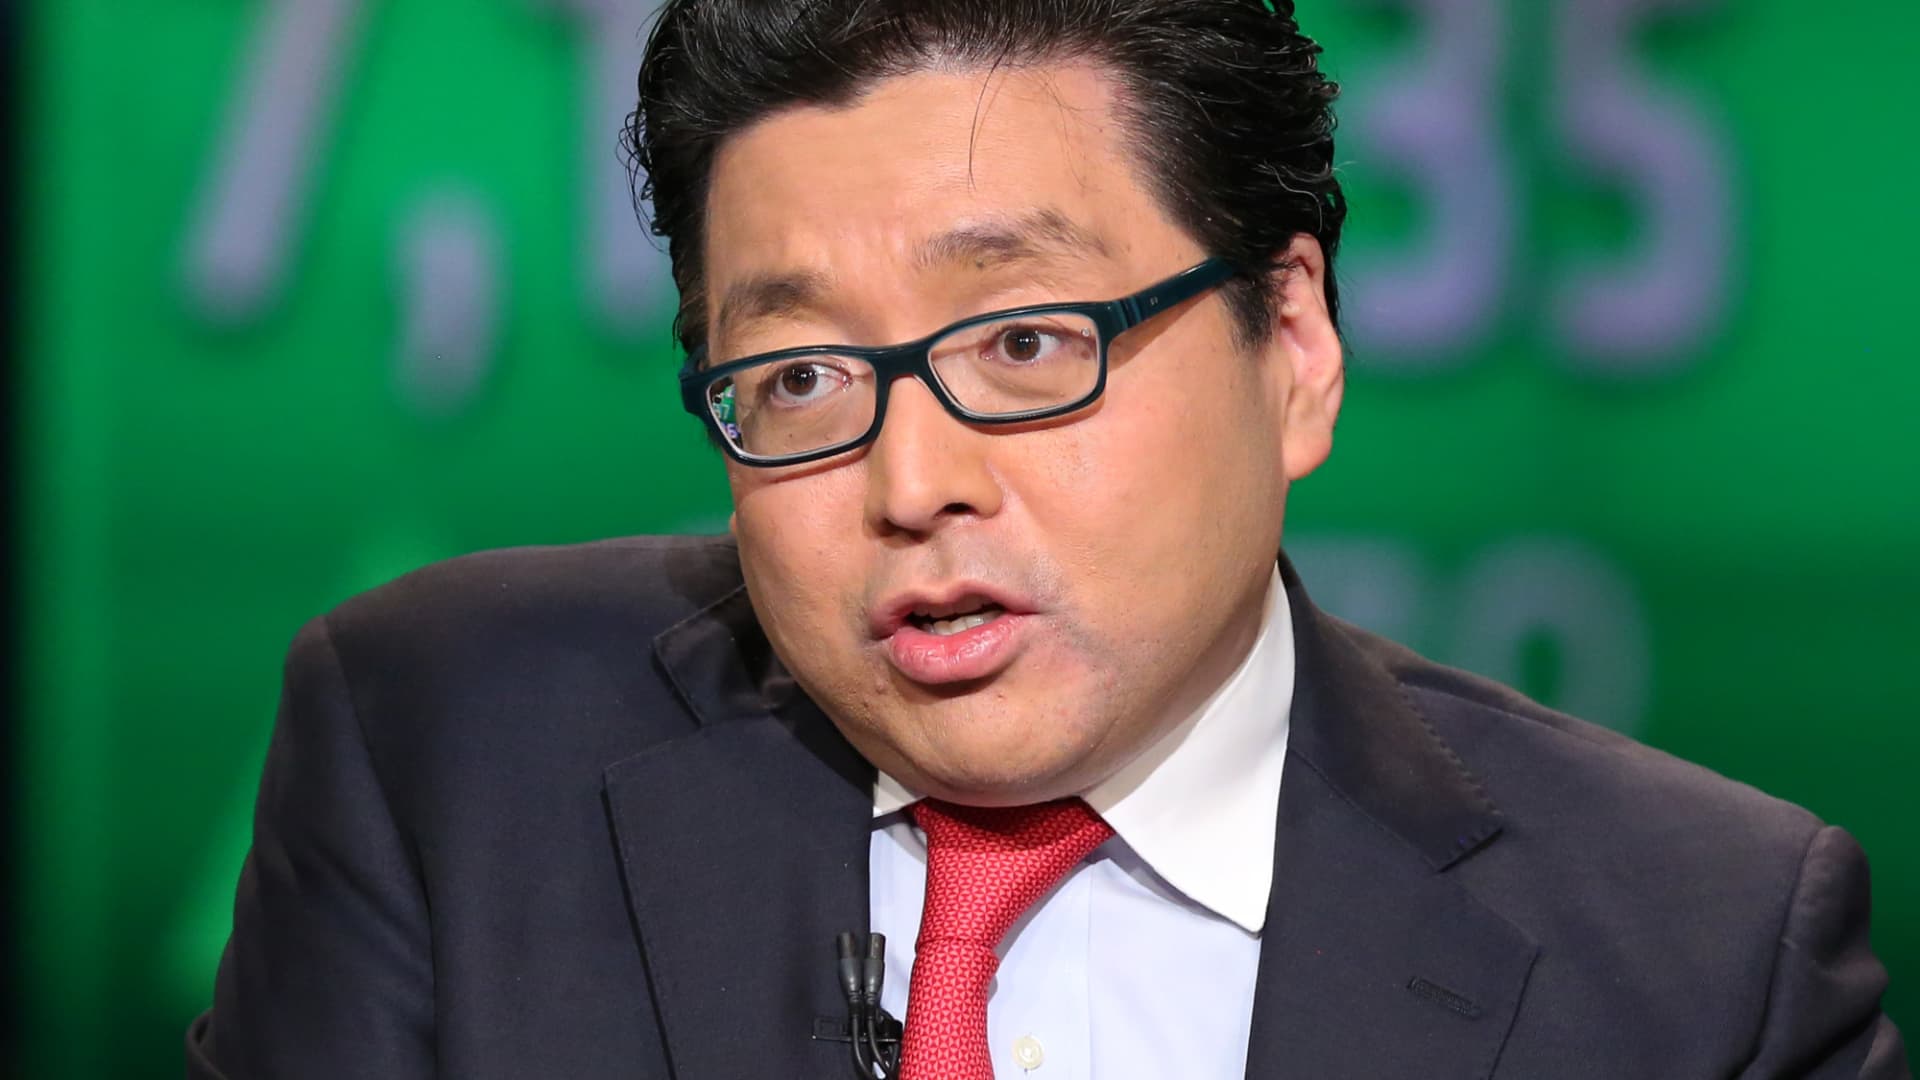 Fundstrat’s Tom Lee predicts the S&P 500 could end the year at 5,700, ‘maybe even higher’